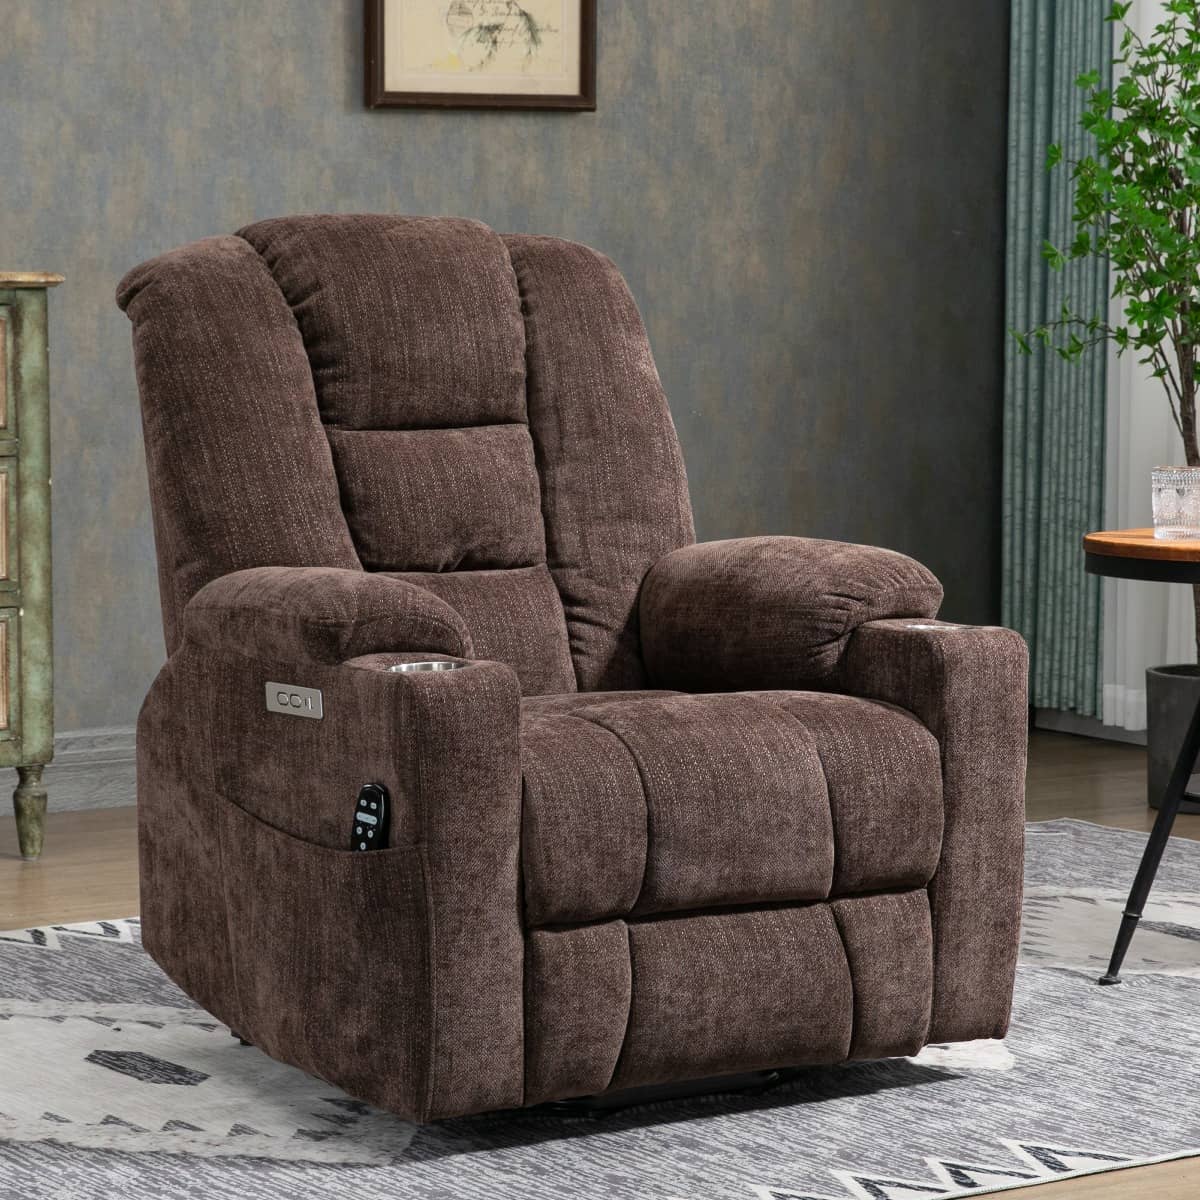 EMON'S Large and Wide Power Lift Recliner Chair with Massage and Heat, Brown